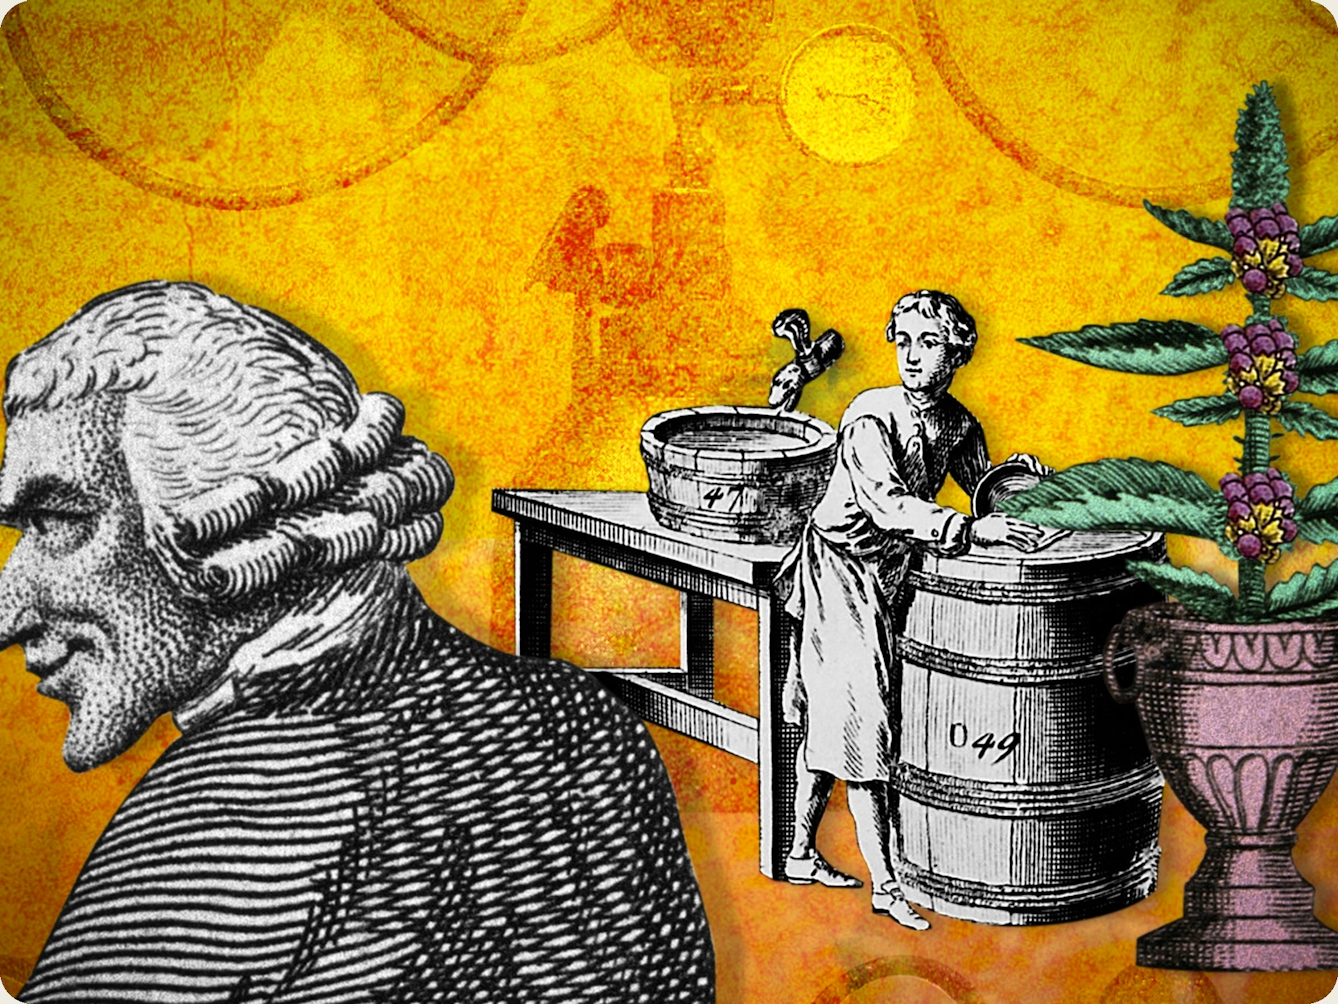 Detail from a larger digital montage artwork created using archive material. The image shows an 18th-century male character in wig and coat looking to the left. The background is a warm orange and yellow with motifs of bubbles and swirls. To the far right of the image a small young boy stands next to a barrel looking towards the chaos of the laboratory experiment.